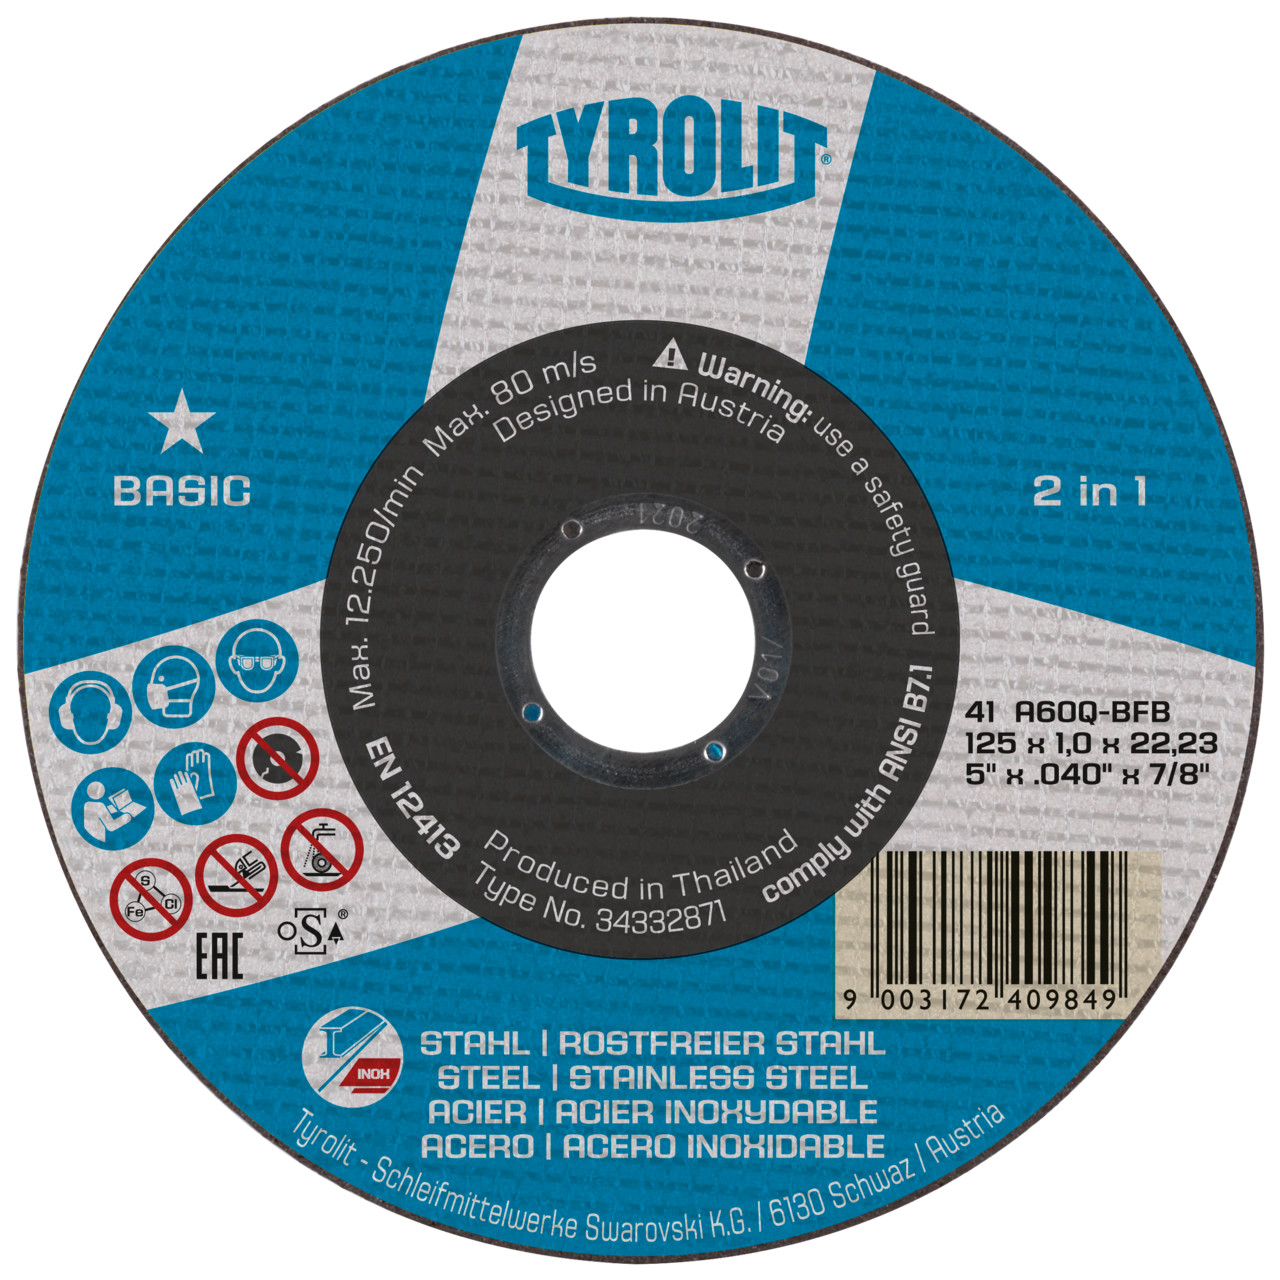 Tyrolit Cutting discs DxUxH 115x2.5x22.23 2in1 for steel and stainless steel, shape: 42 - offset version, Art. 223021